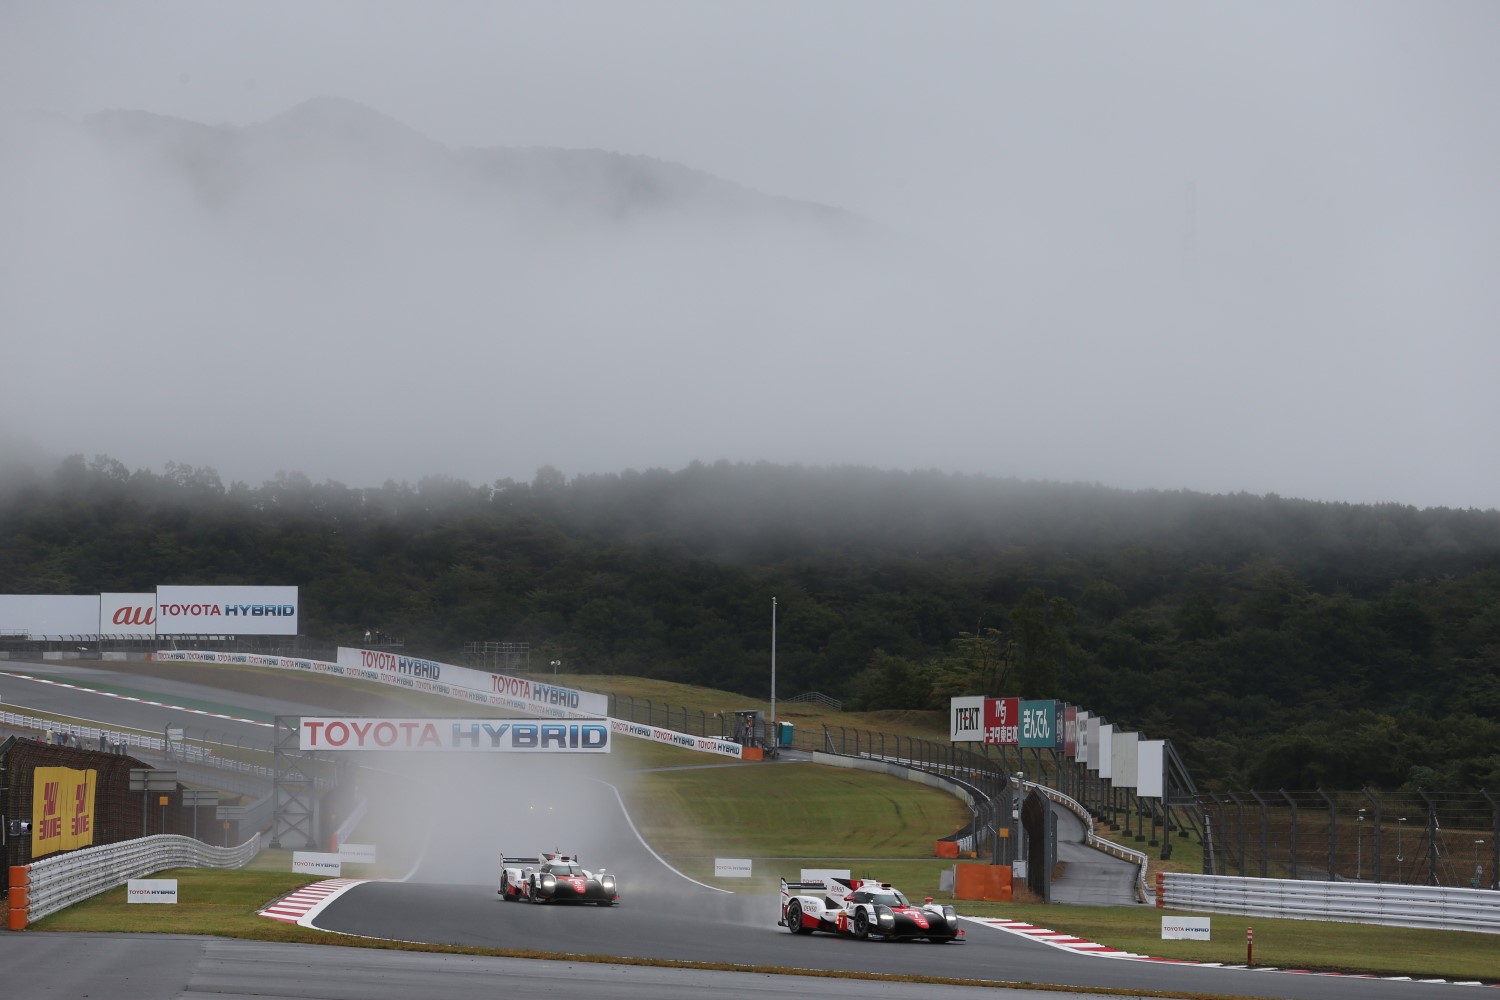 It was another wet day at Fuji